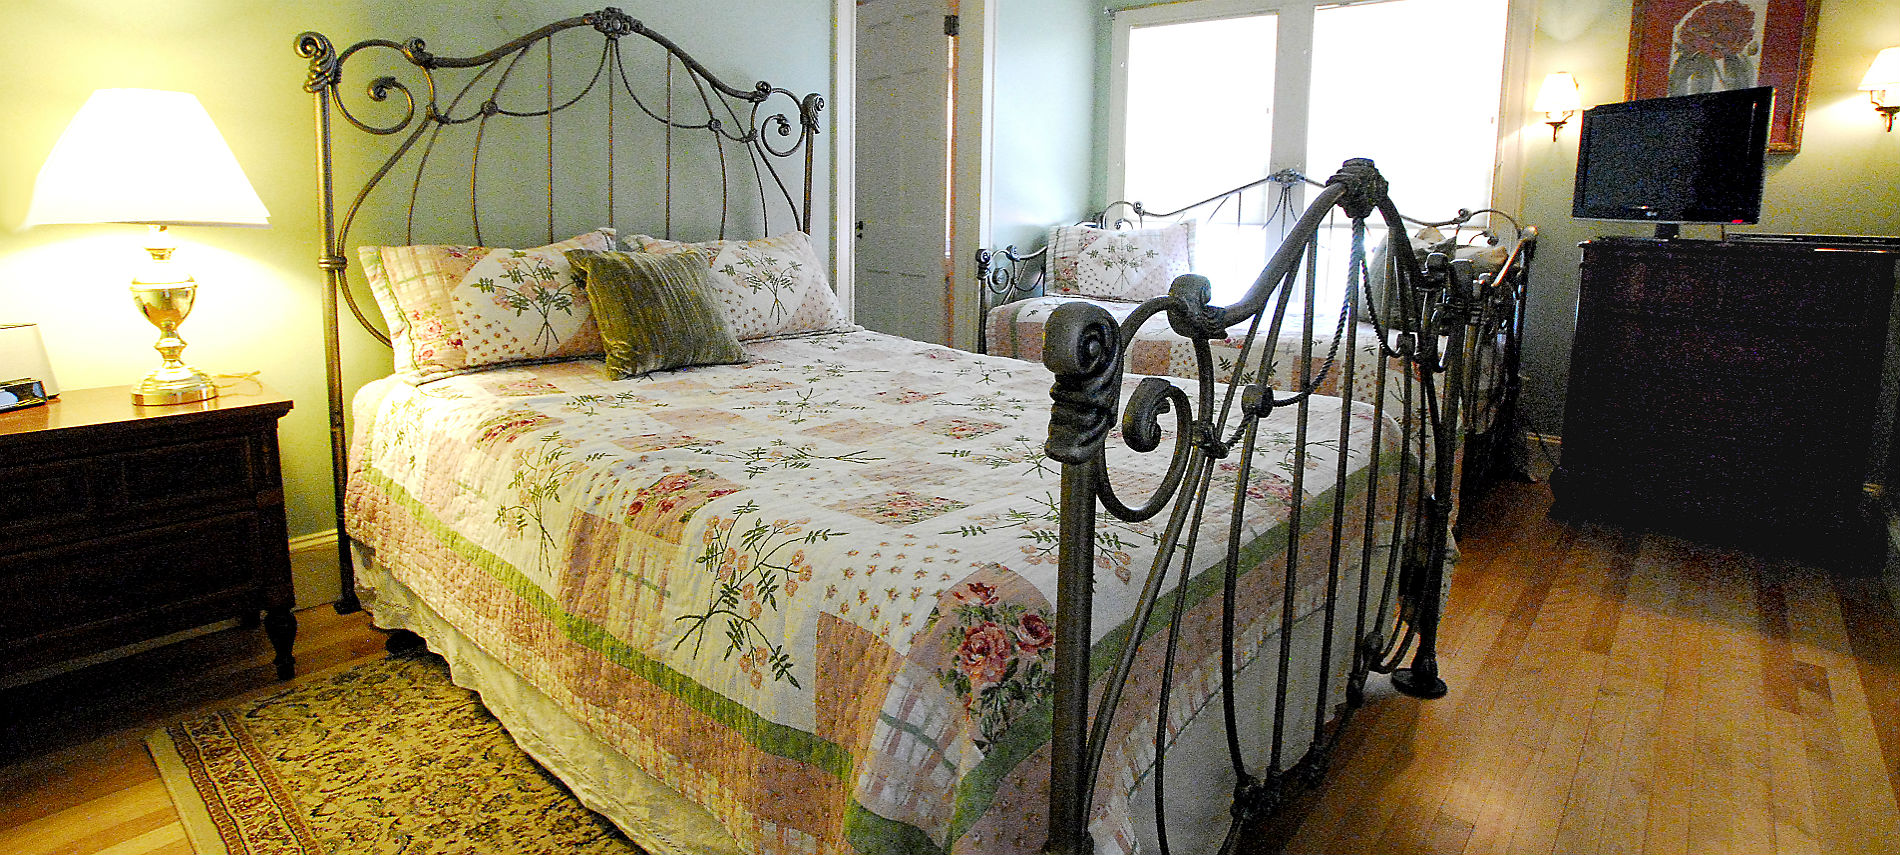 Cozy bedroom with an ornate iron bedstead made up with a floral quilt.